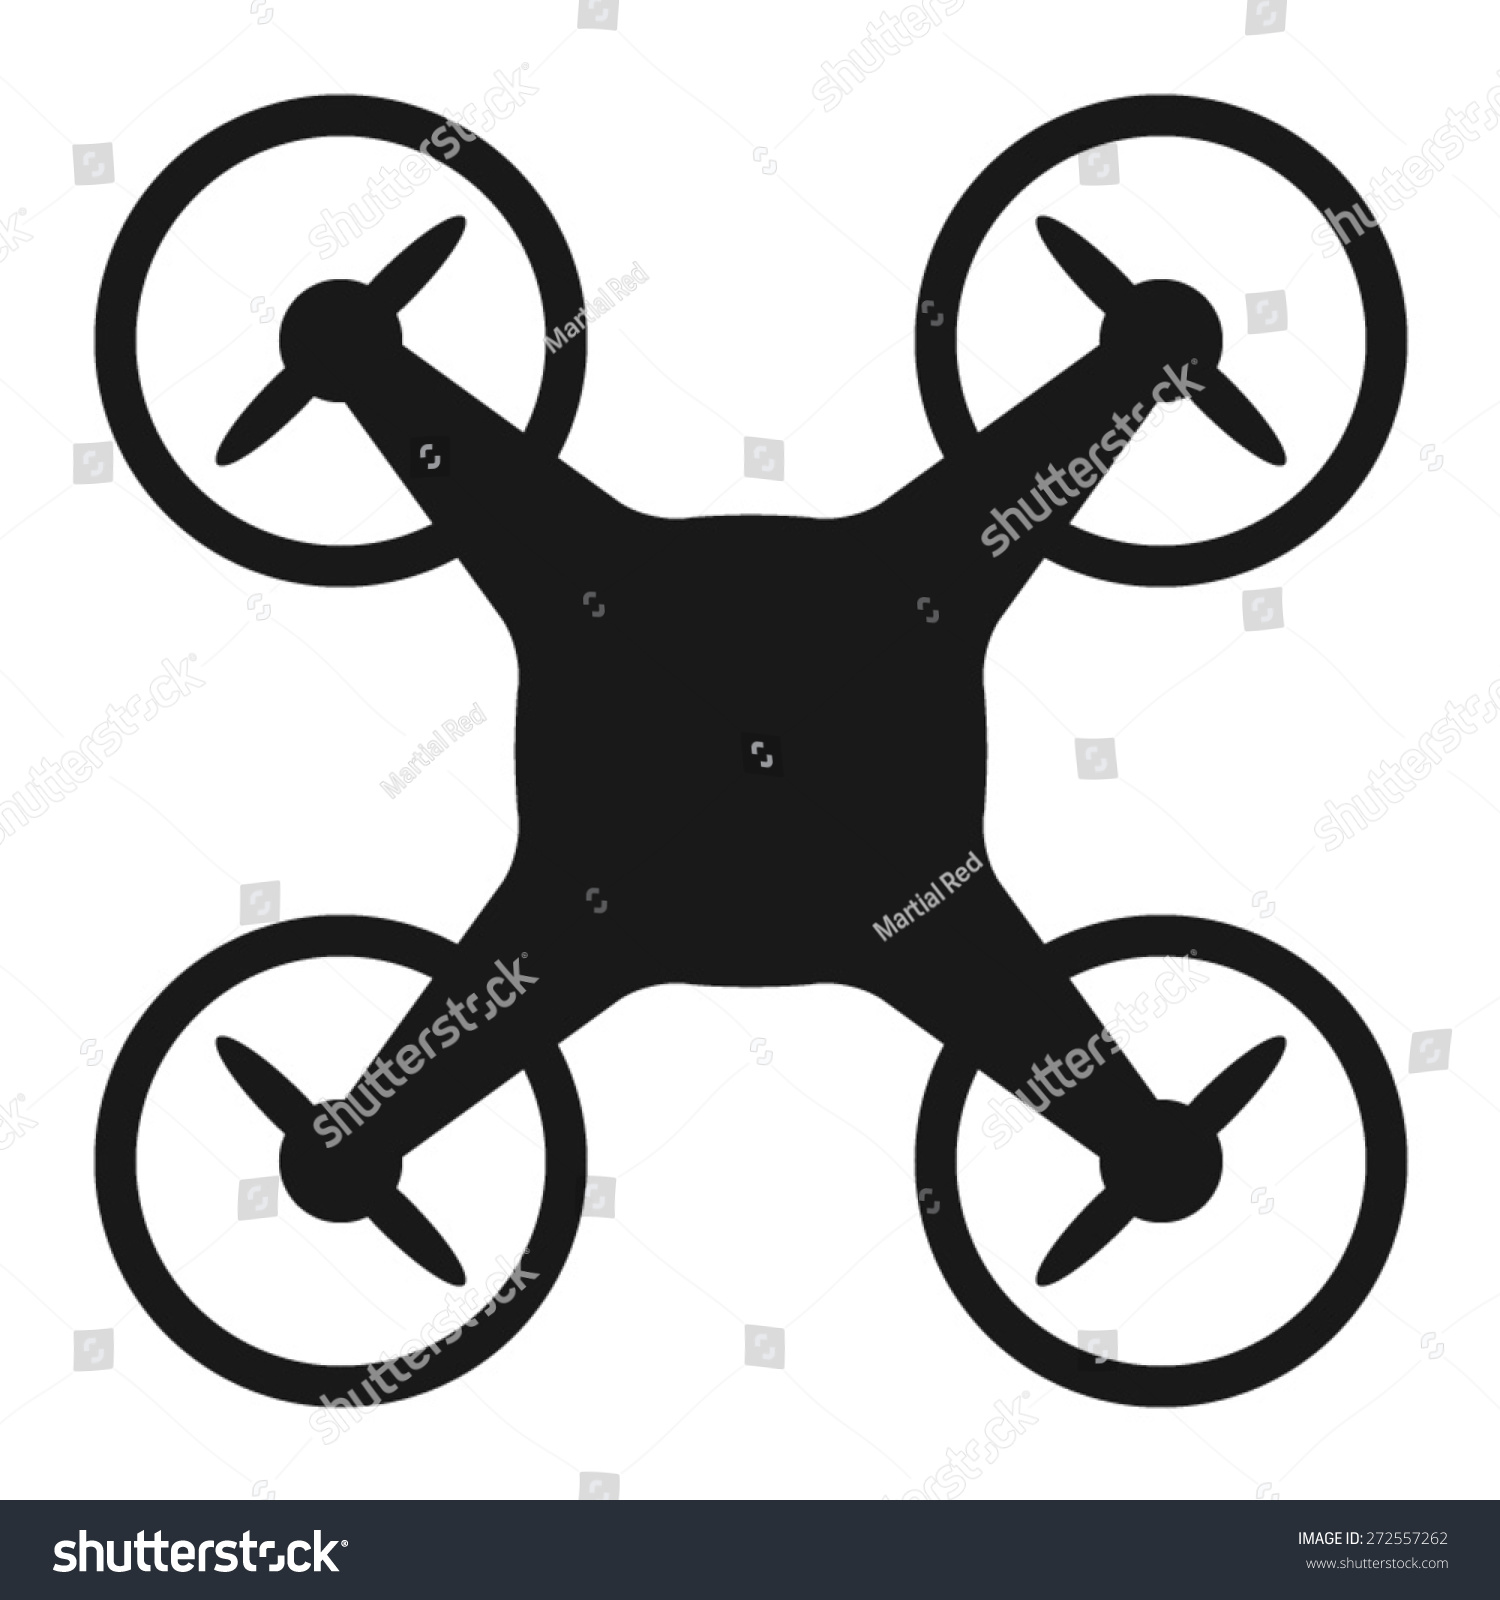 military drone clipart - photo #23